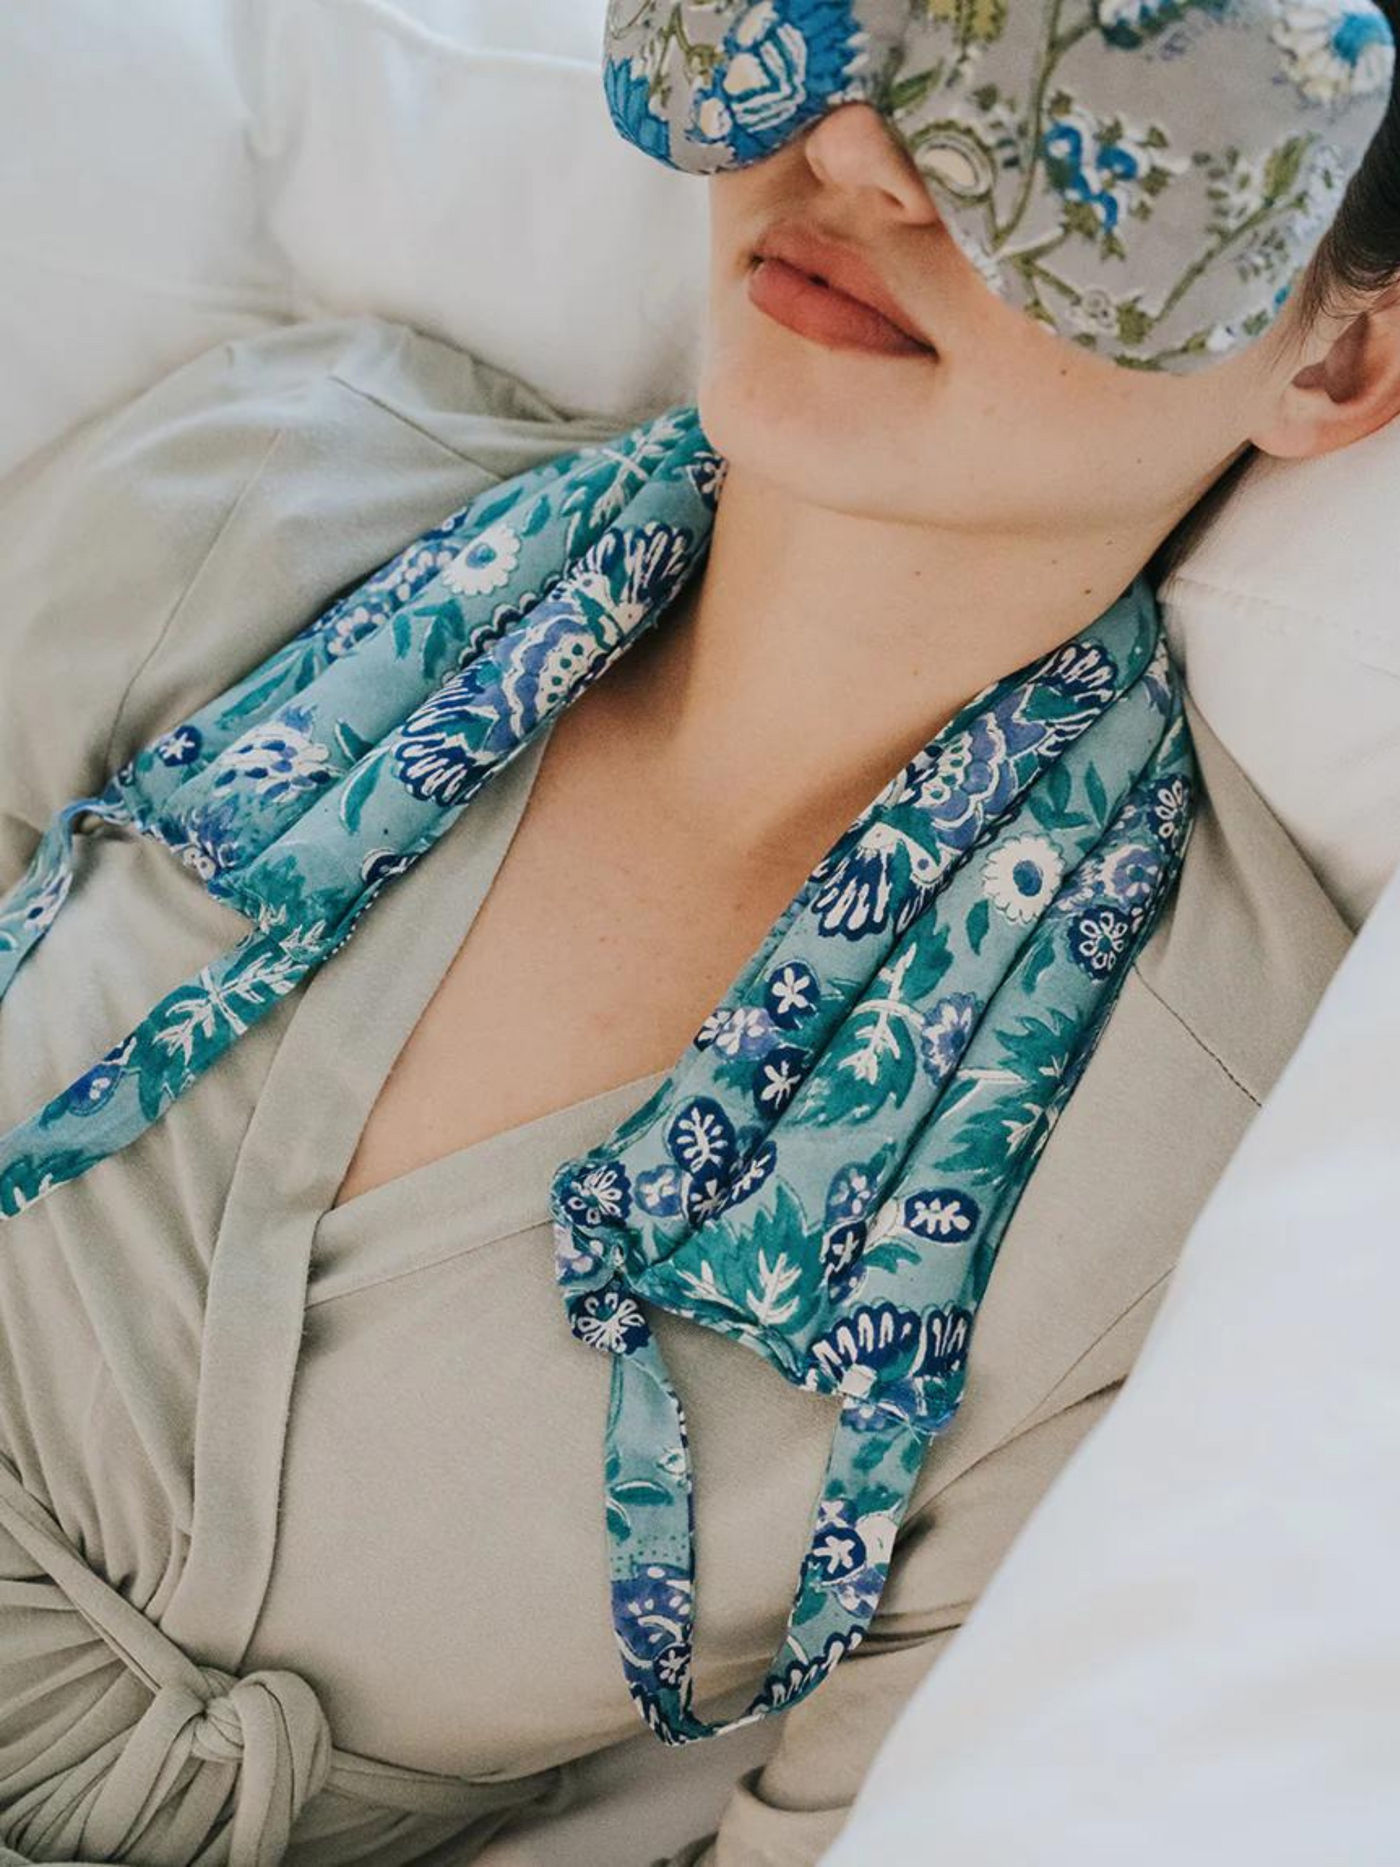 Weighted Lavender Neck Wrap - Assorted Blockprint Pattern